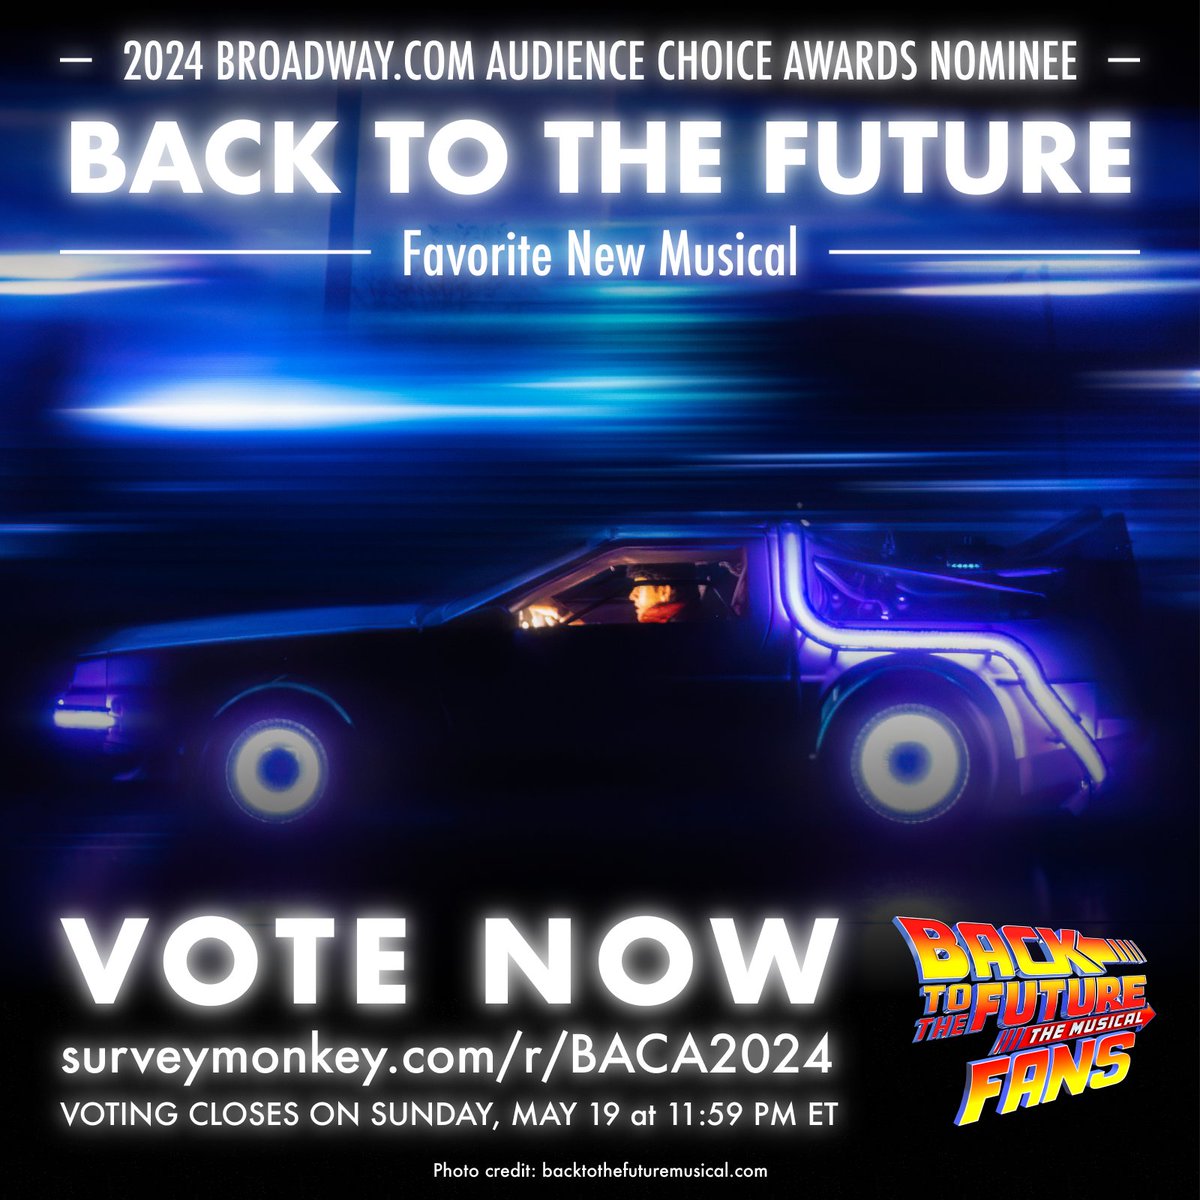 Thanks to everyone who voted for @BTTFBway to be shortlisted in the 2024 @broadwaycom Audience Choice Awards. The show is nominated in 7 categories!

VOTE for @BTTFBway to win the award for…

⚡️ Favorite New Musical

🗳 surveymonkey.com/r/BACA2024

#bttfbway #bttfbroadway #broadway